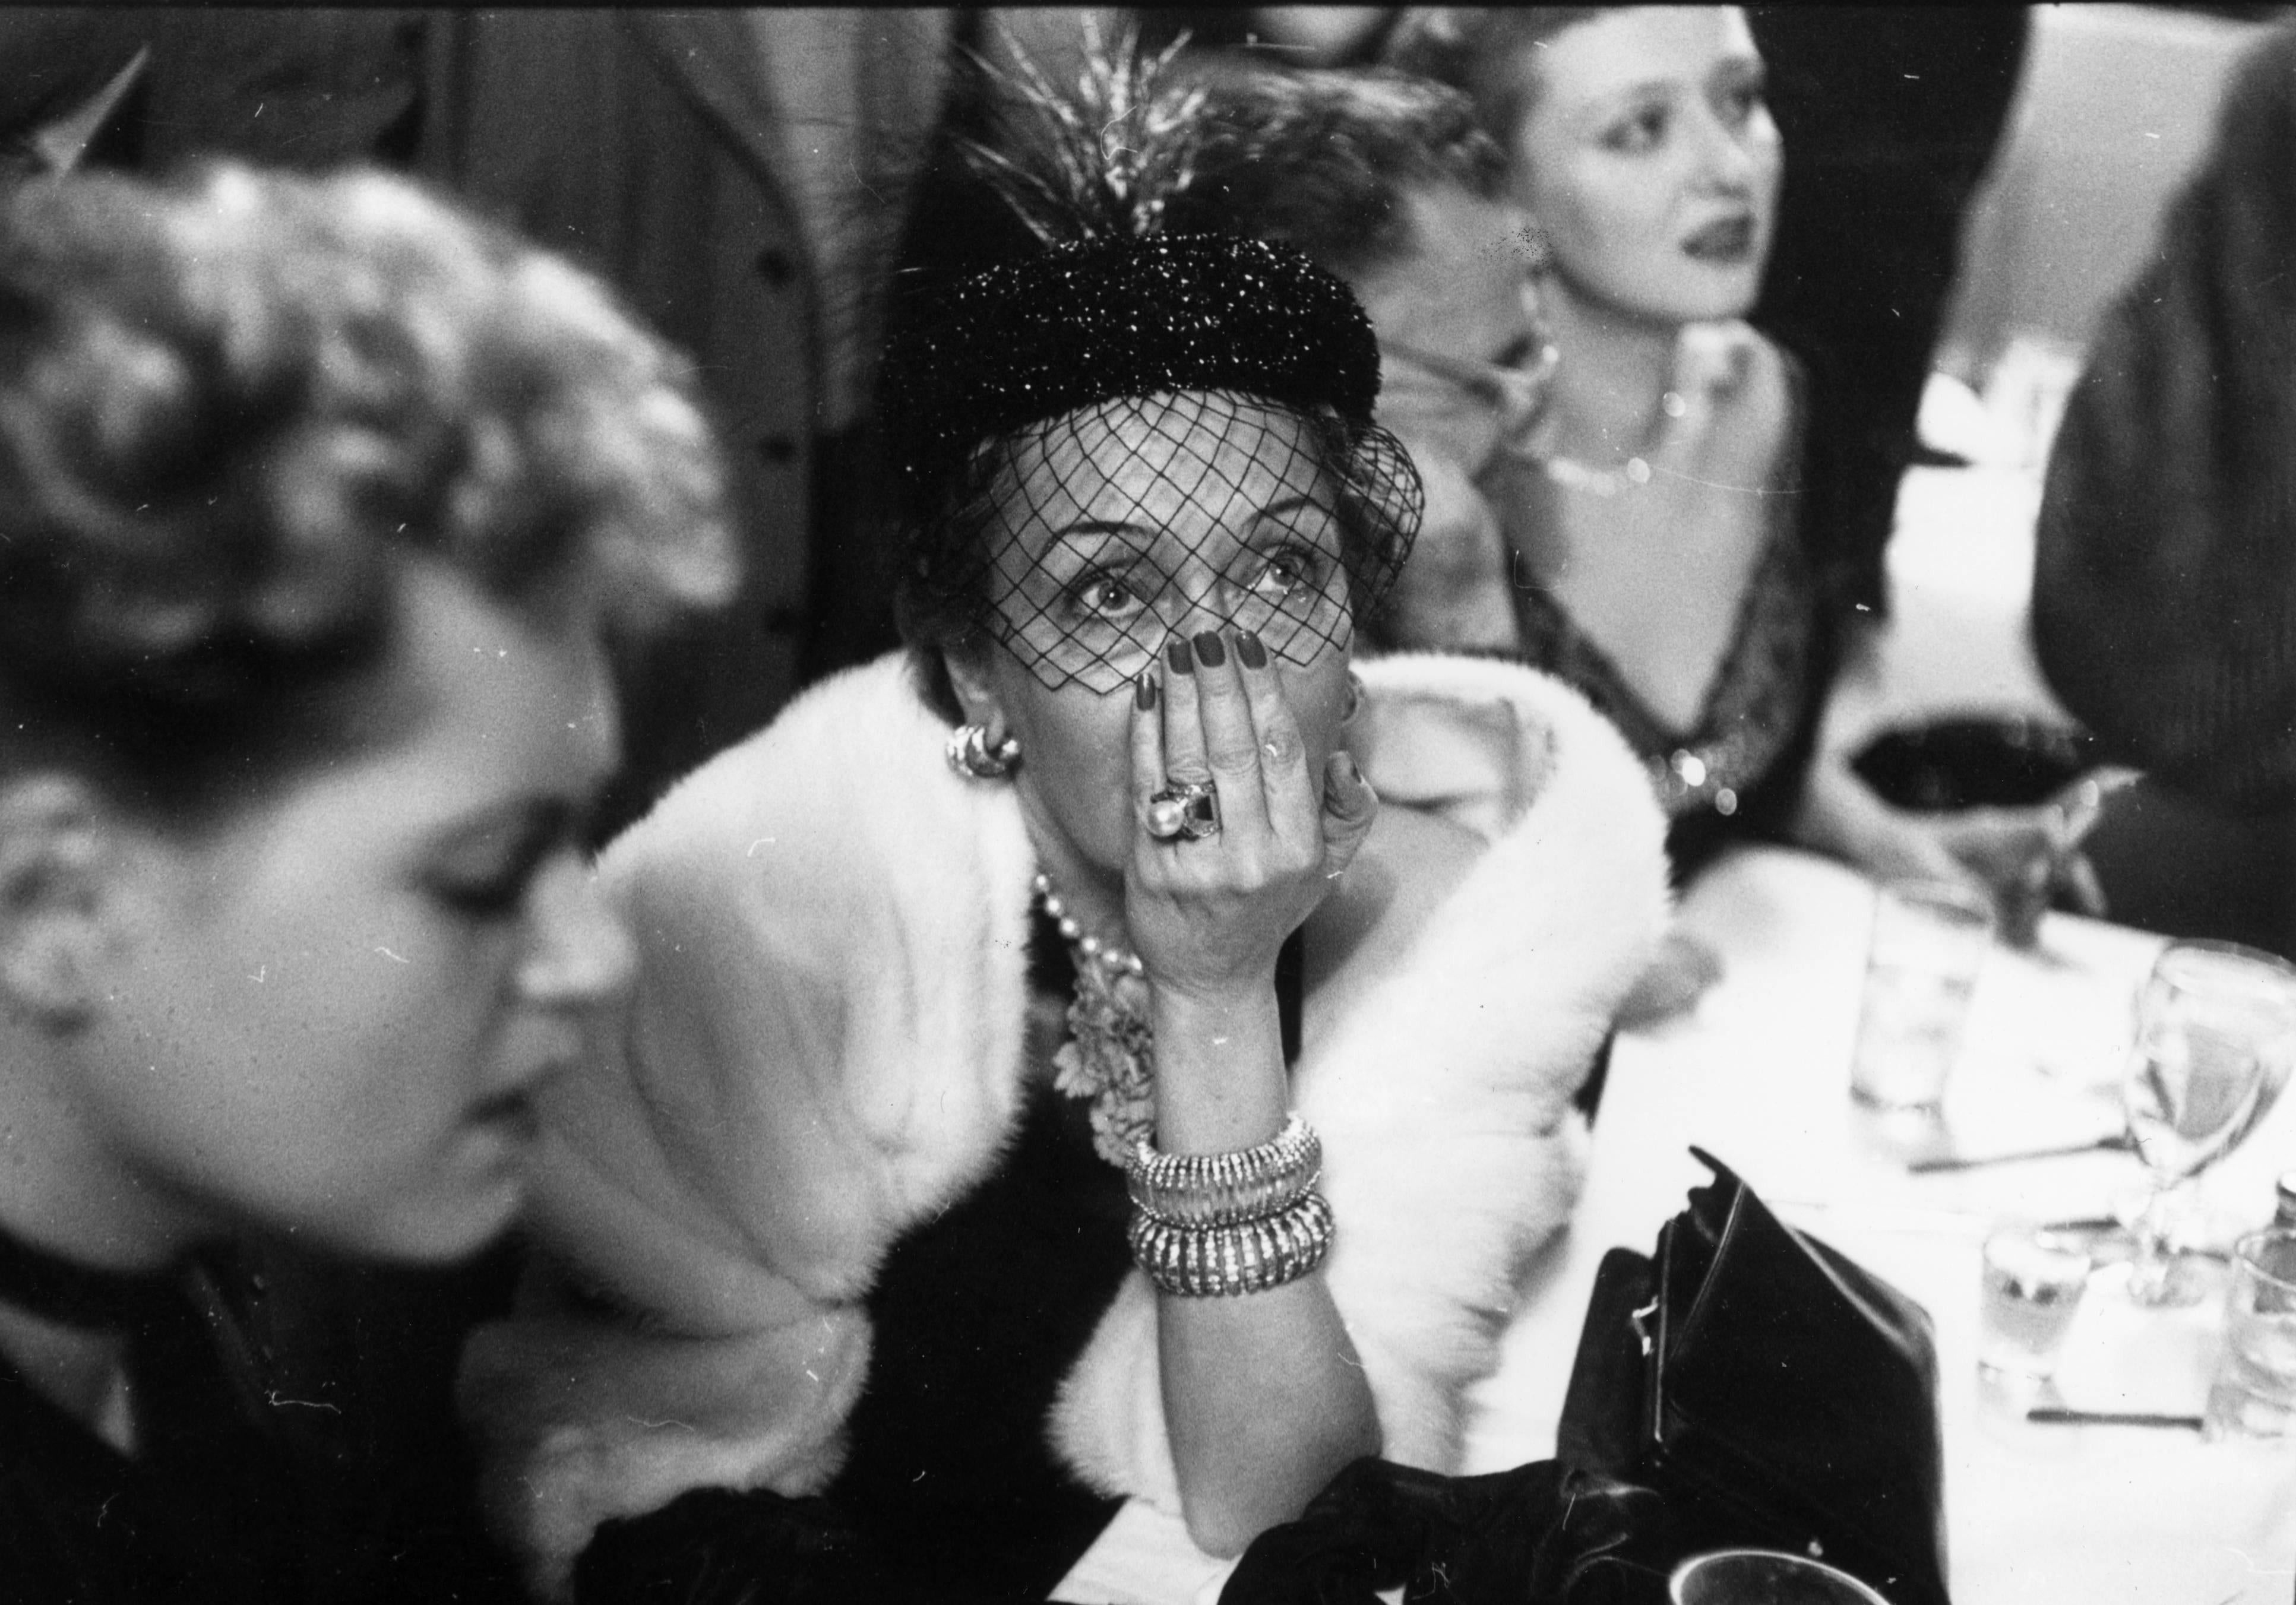 Premium Rates Apply. 2nd April 1951: American actress, Gloria Swanson, anxiously awaits the results of the Best Actress award at a cafe on West 52nd Street, New York. On her left is her fellow nominee and the eventual winner, Judy Holliday. (Photo